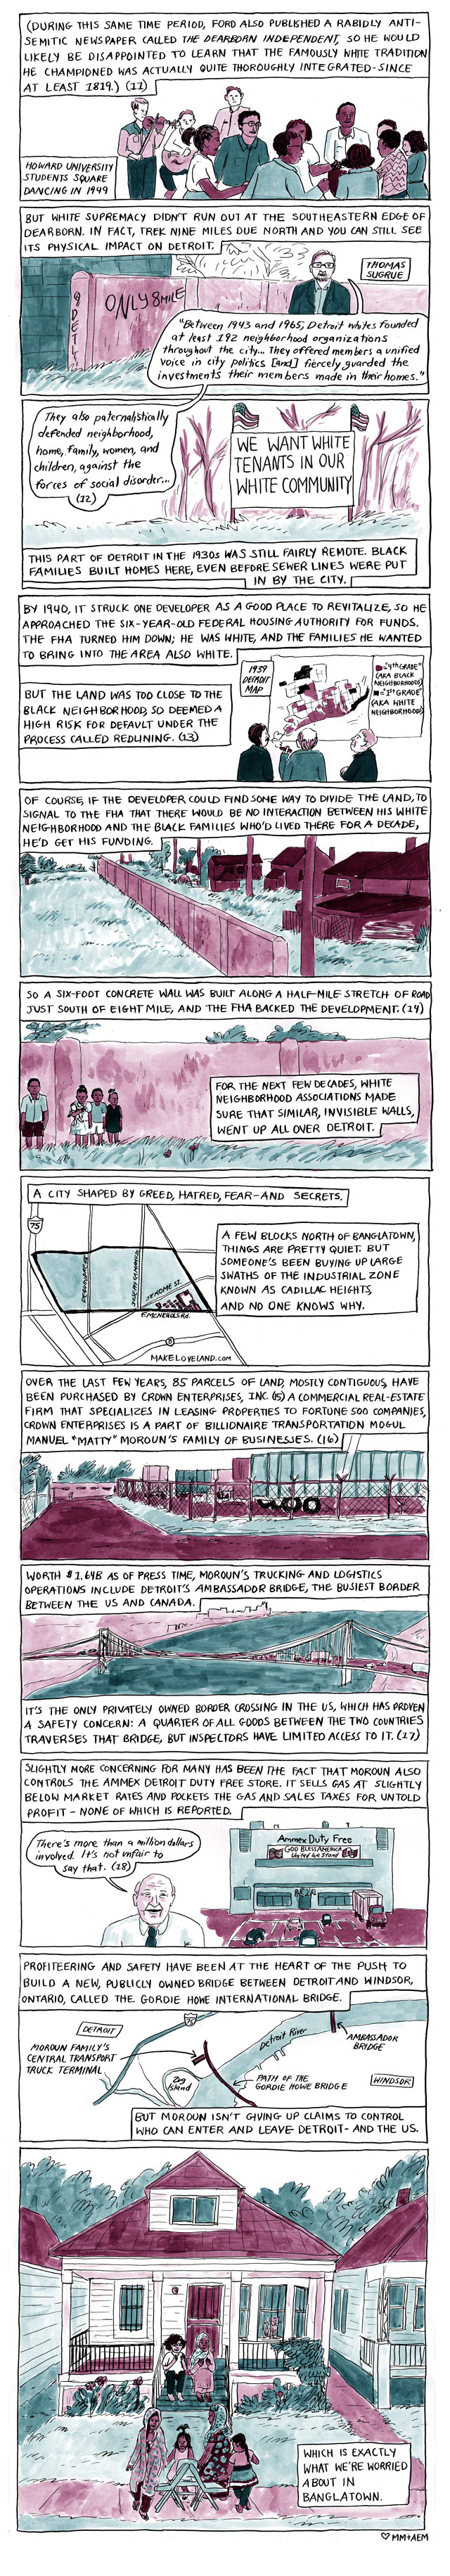 2 Drawing Boundaries: Histories of Segregation and Profit-Making in Detroit Page 2